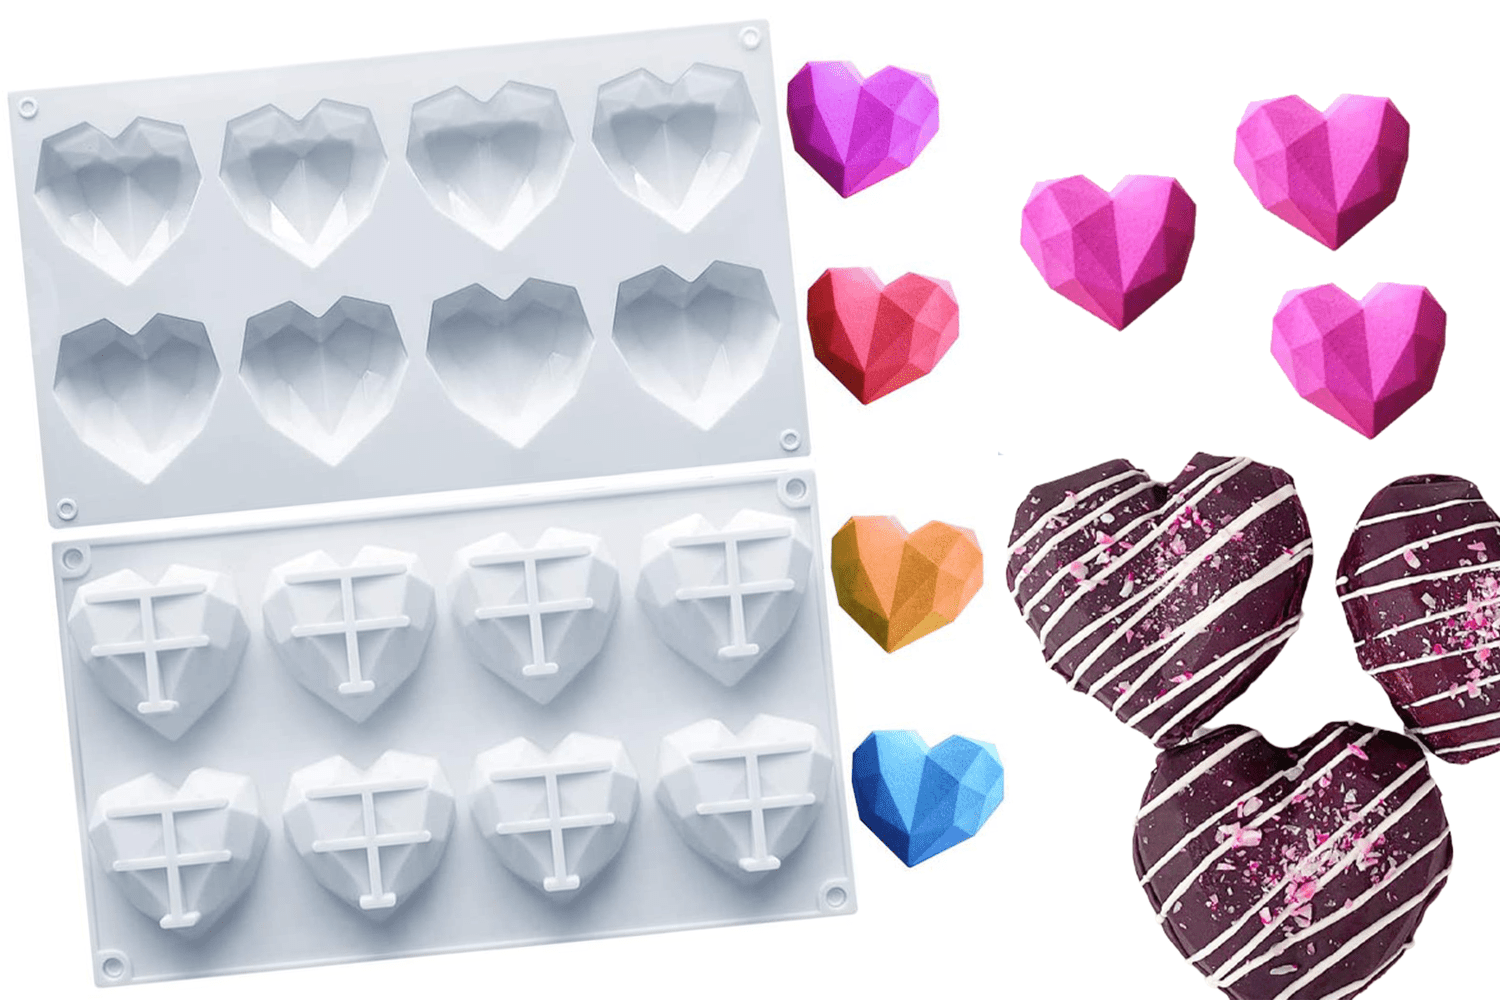 SMALL HEARTS & CUPIDS PIECES  mold molds Chocolate Candy cupcake toppers 